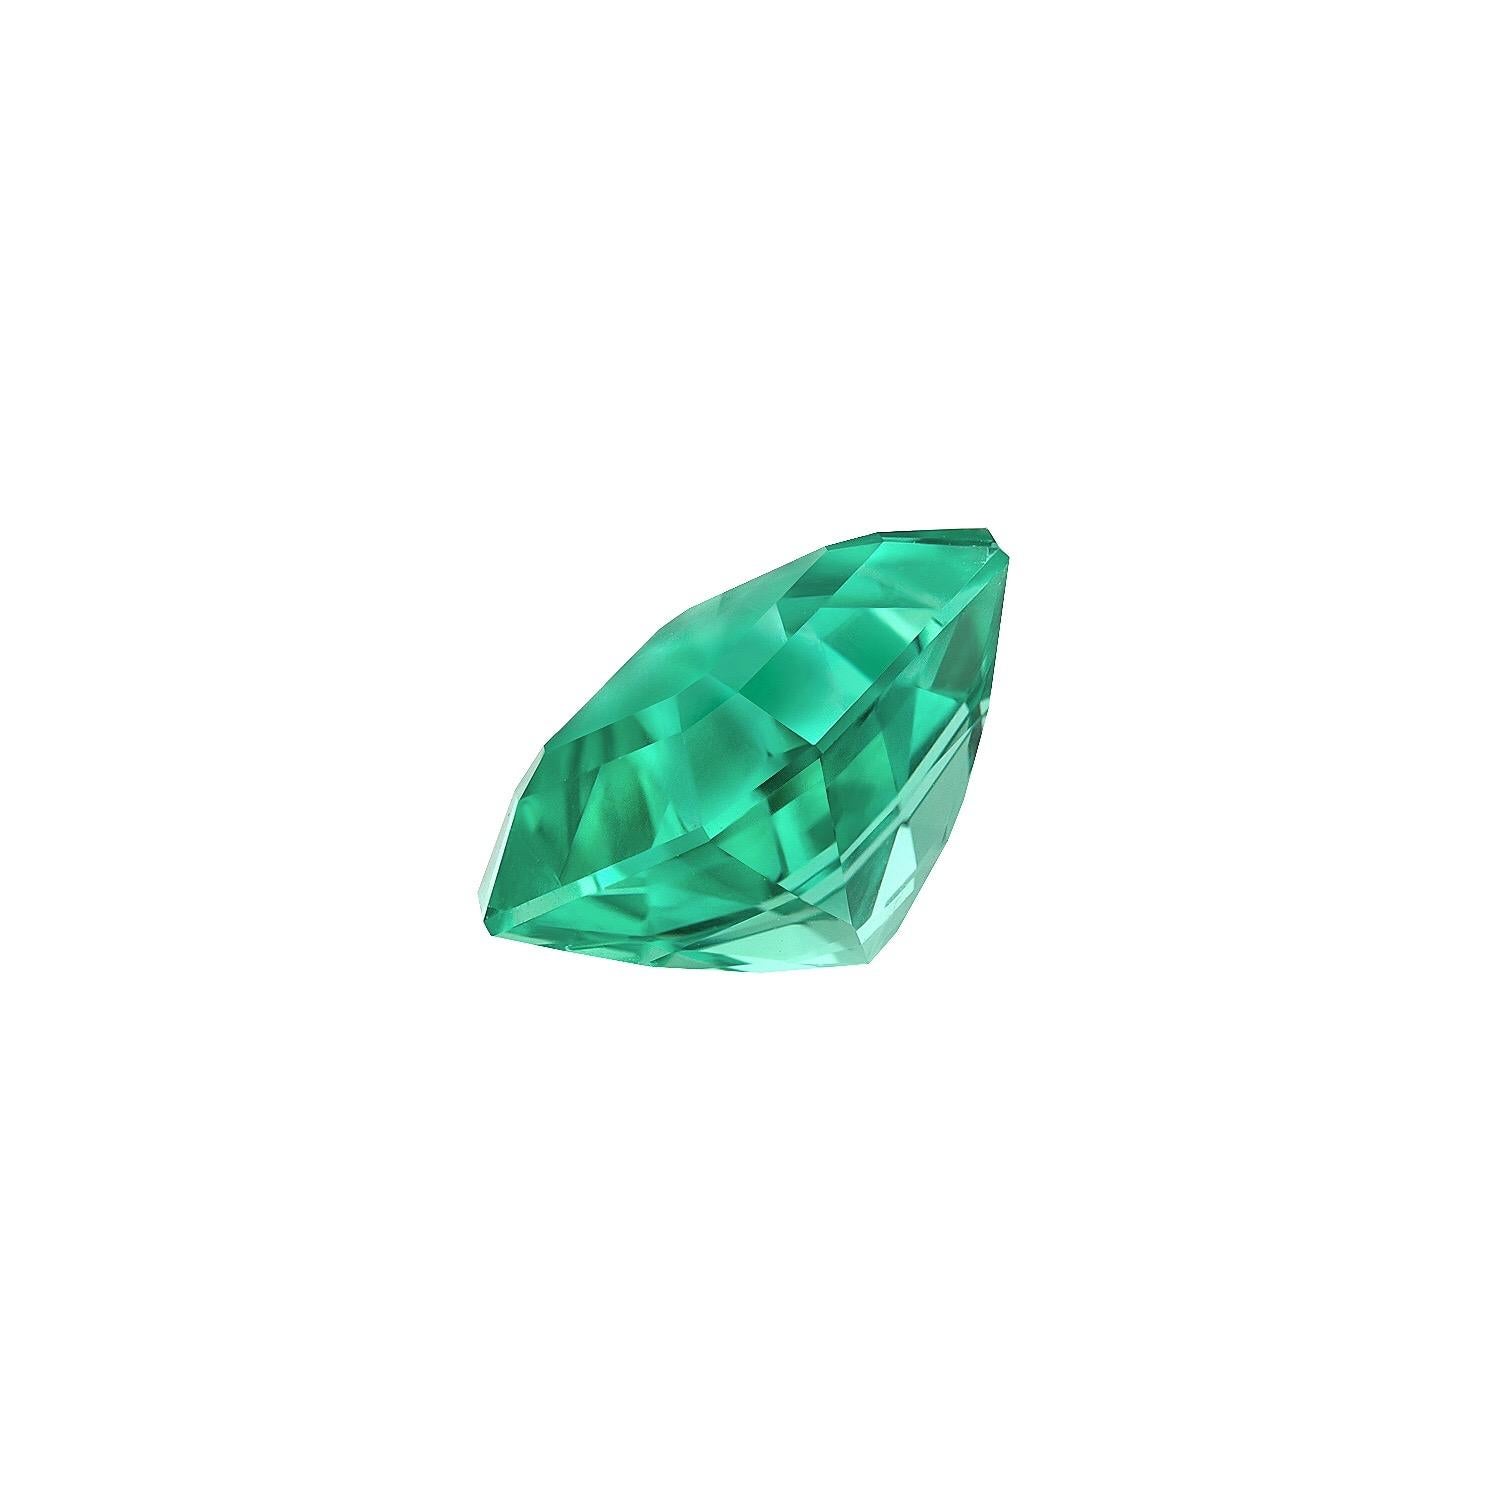 Rare and exceptional, untreated - “no oil”, 2.14 carat Colombian Emerald gem. Superior in clarity and cut, this “loupe clean”, square octagon gem, is offered loose to the worlds' most discerning gem collectors.
The AGL gem certificate is attached to